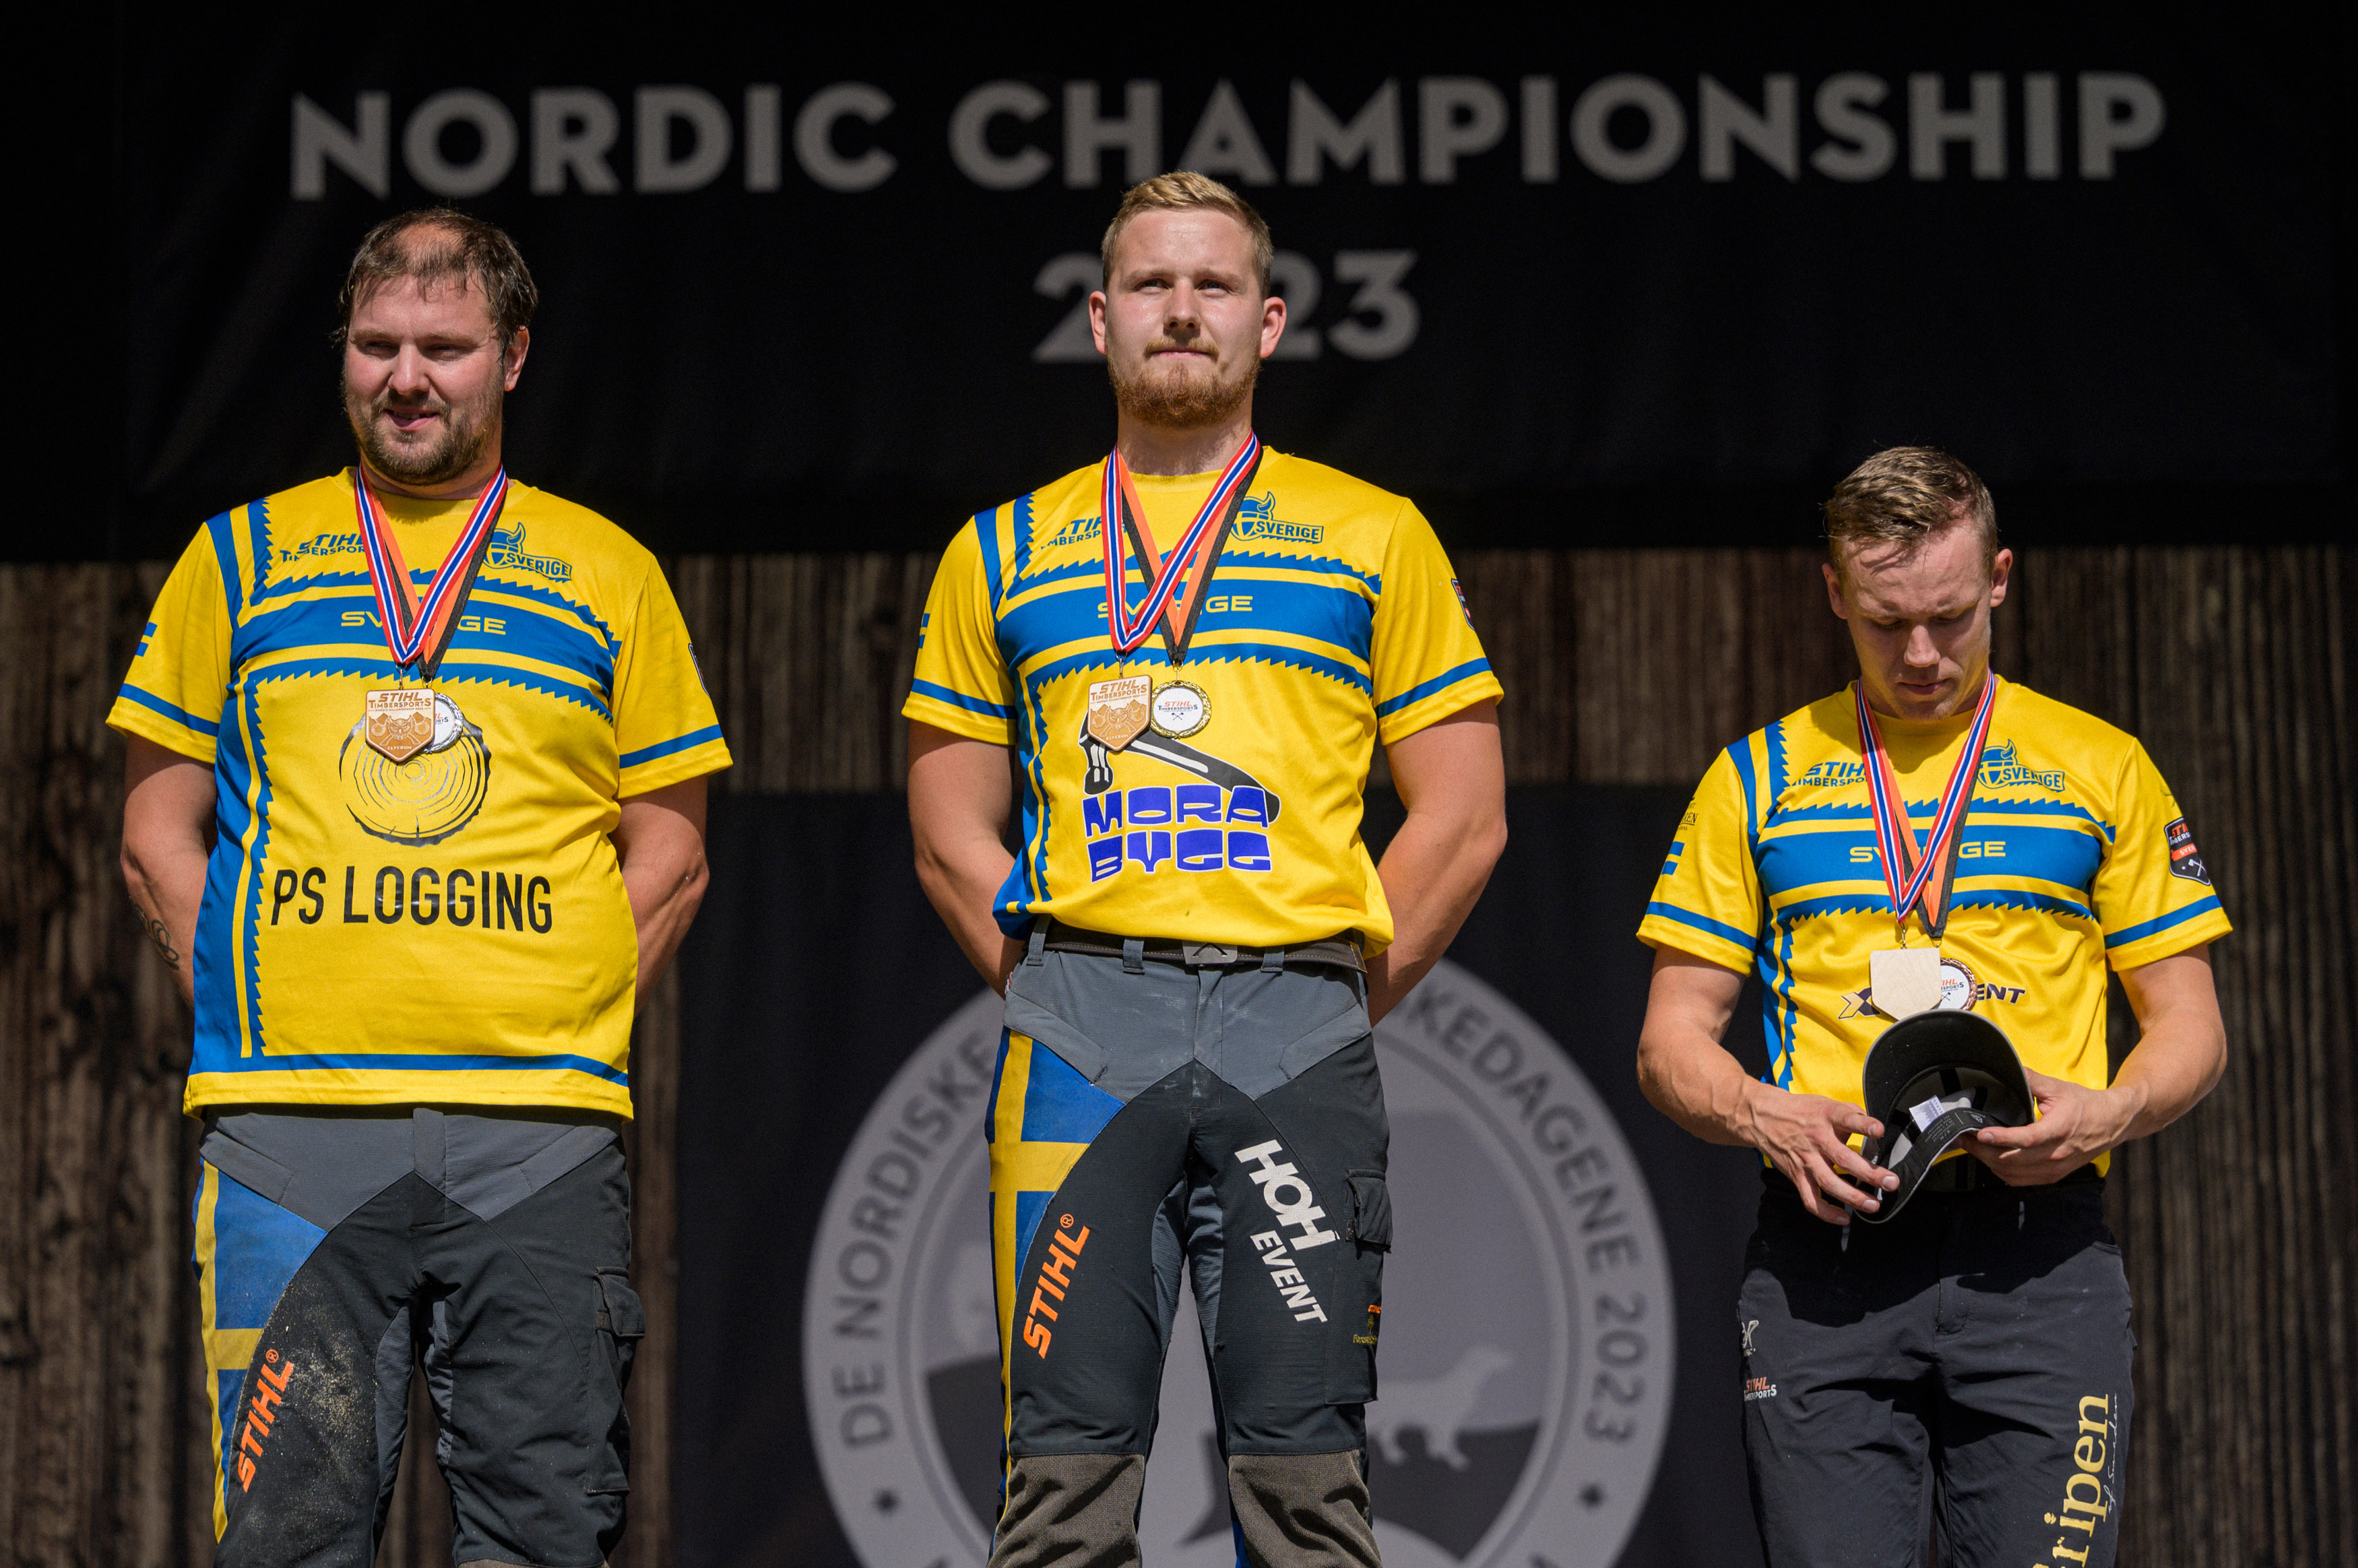 Emil Hansson defended his championship title in Elverum leaving Pontus Skye (left) and Ferry Svan (right) behind him.